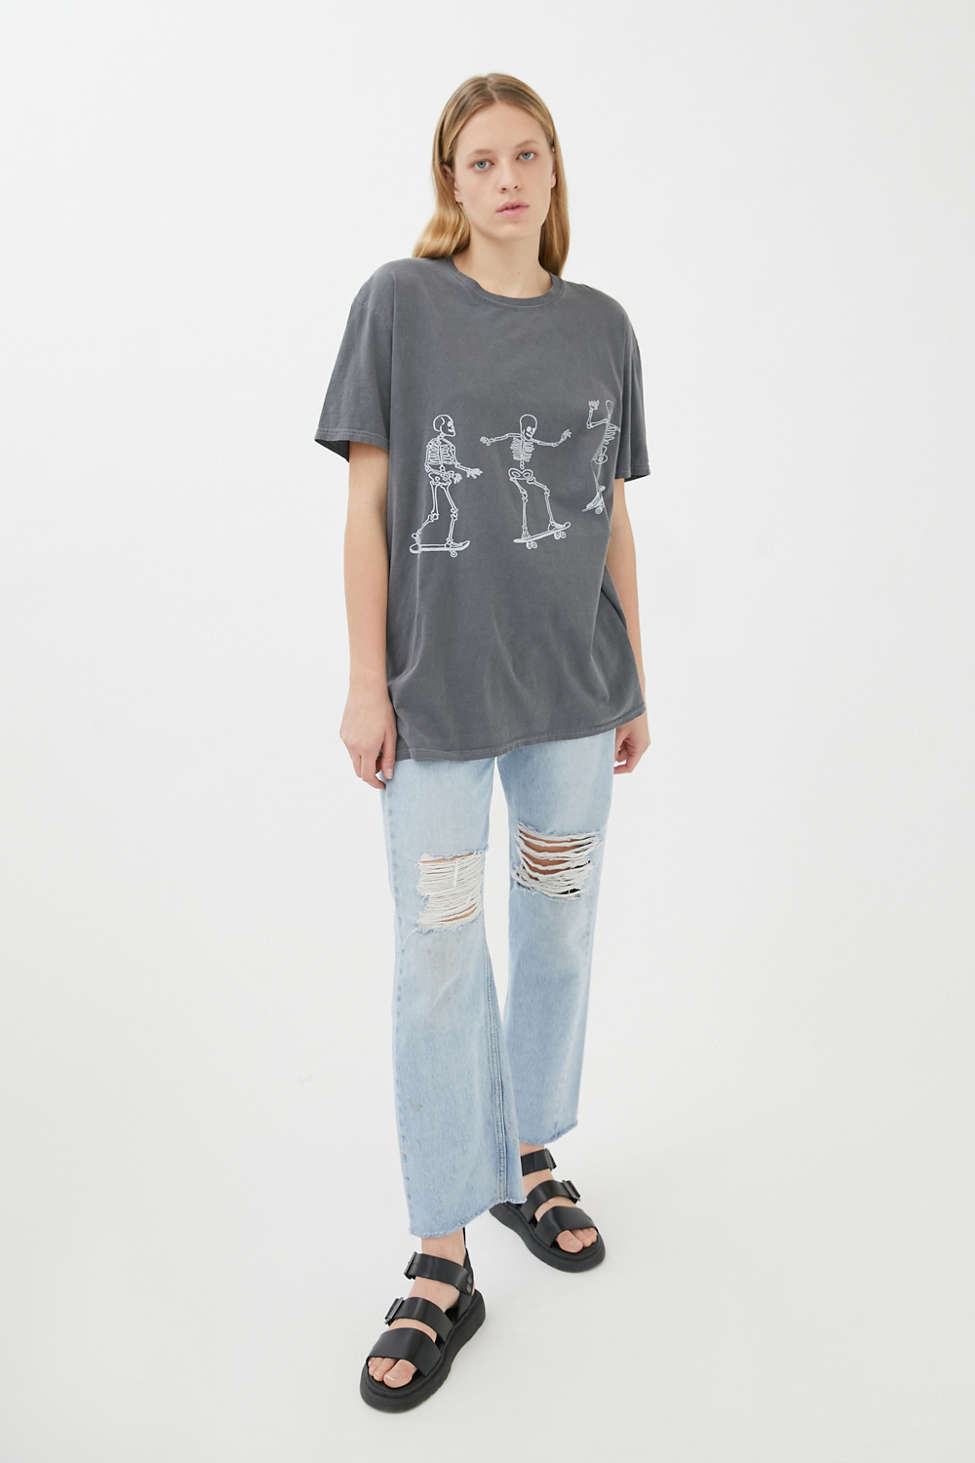 Project Social T Skateboard Skeletons Tee | Urban Outfitters